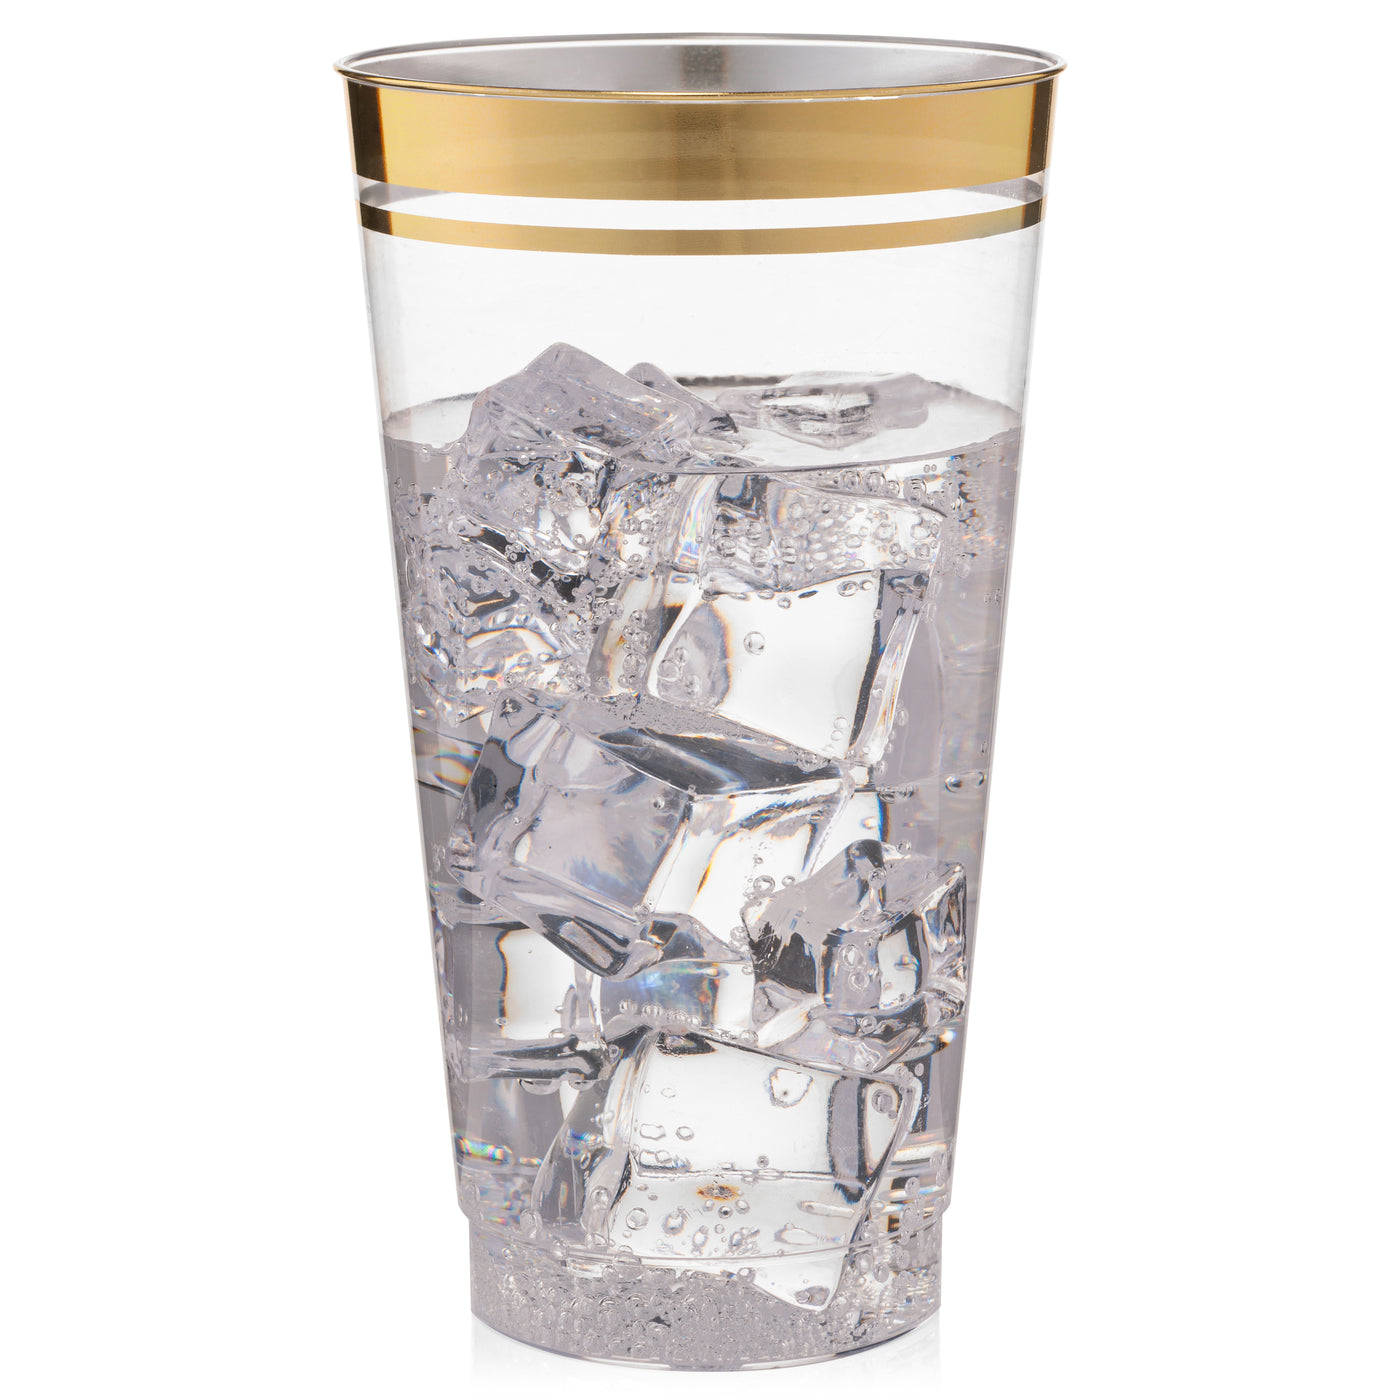 10 oz Clear Plastic Cups Old Fashioned Tumblers Gold Rimmed Fancy  Disposable Wedding Cups for Elegant Party 16ct.